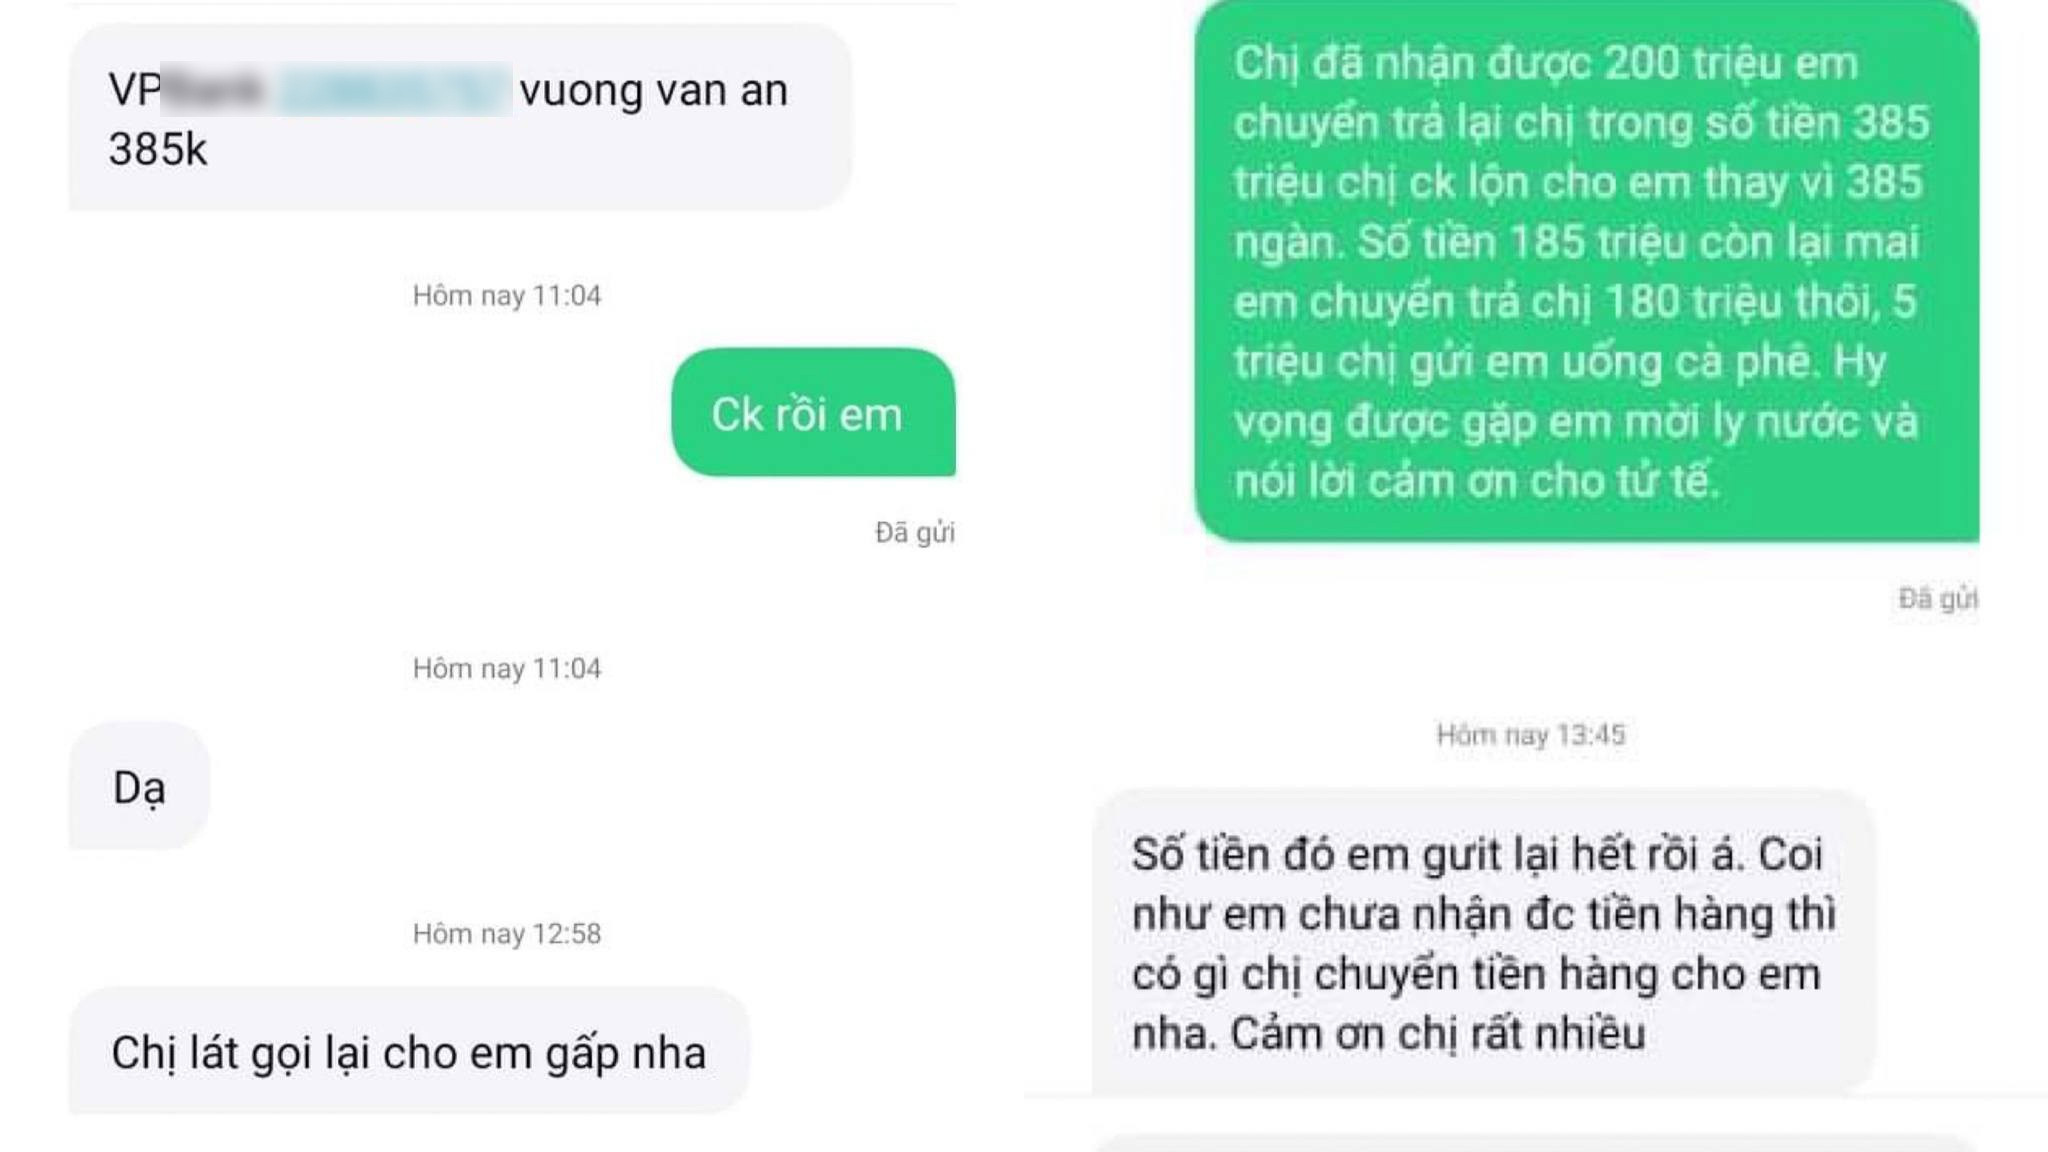 The shipper in Ho Chi Minh City returned nearly 400 million VND to the wrong customer - 2